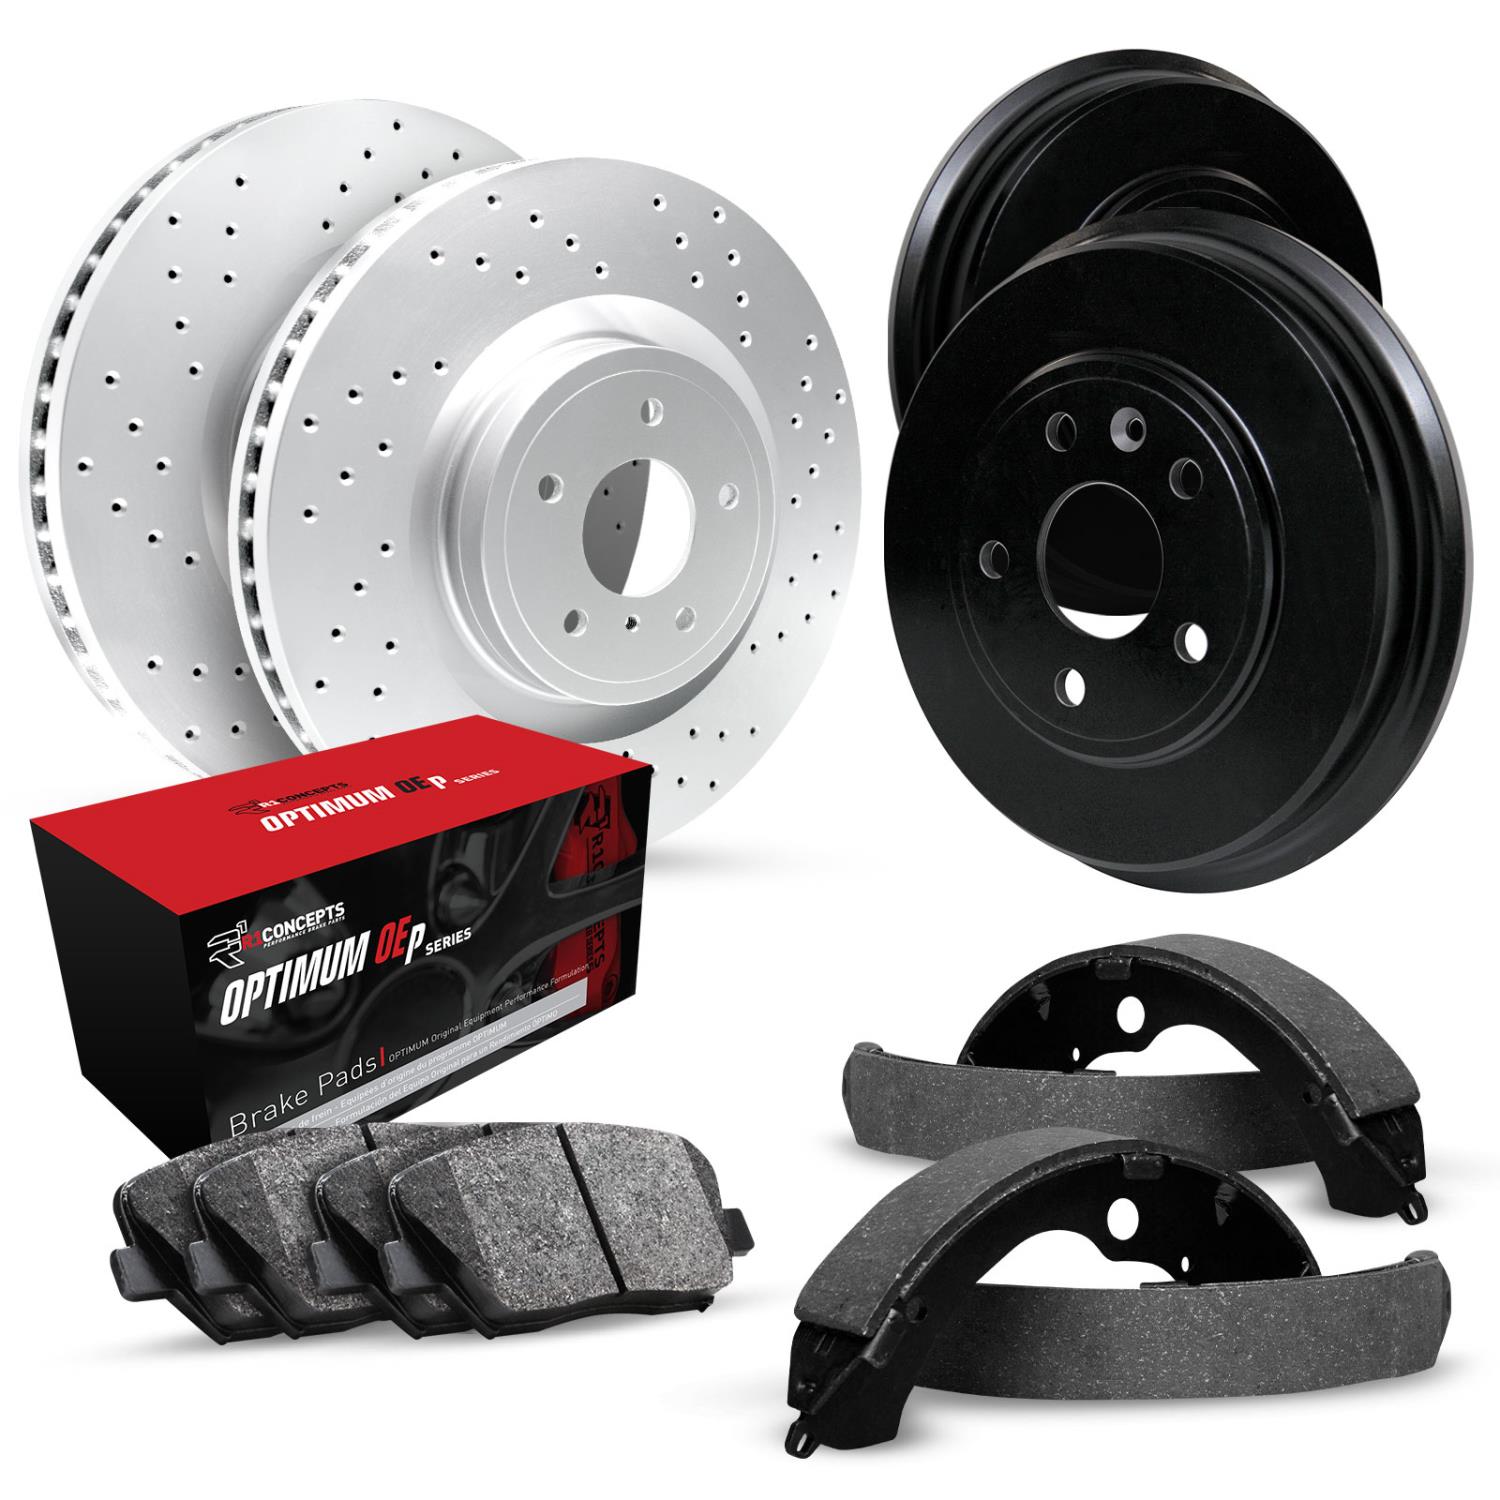 GEO-Carbon Drilled Brake Rotor & Drum Set w/Optimum OE Pads & Shoes, 1982-1982 GM, Position: Front & Rear